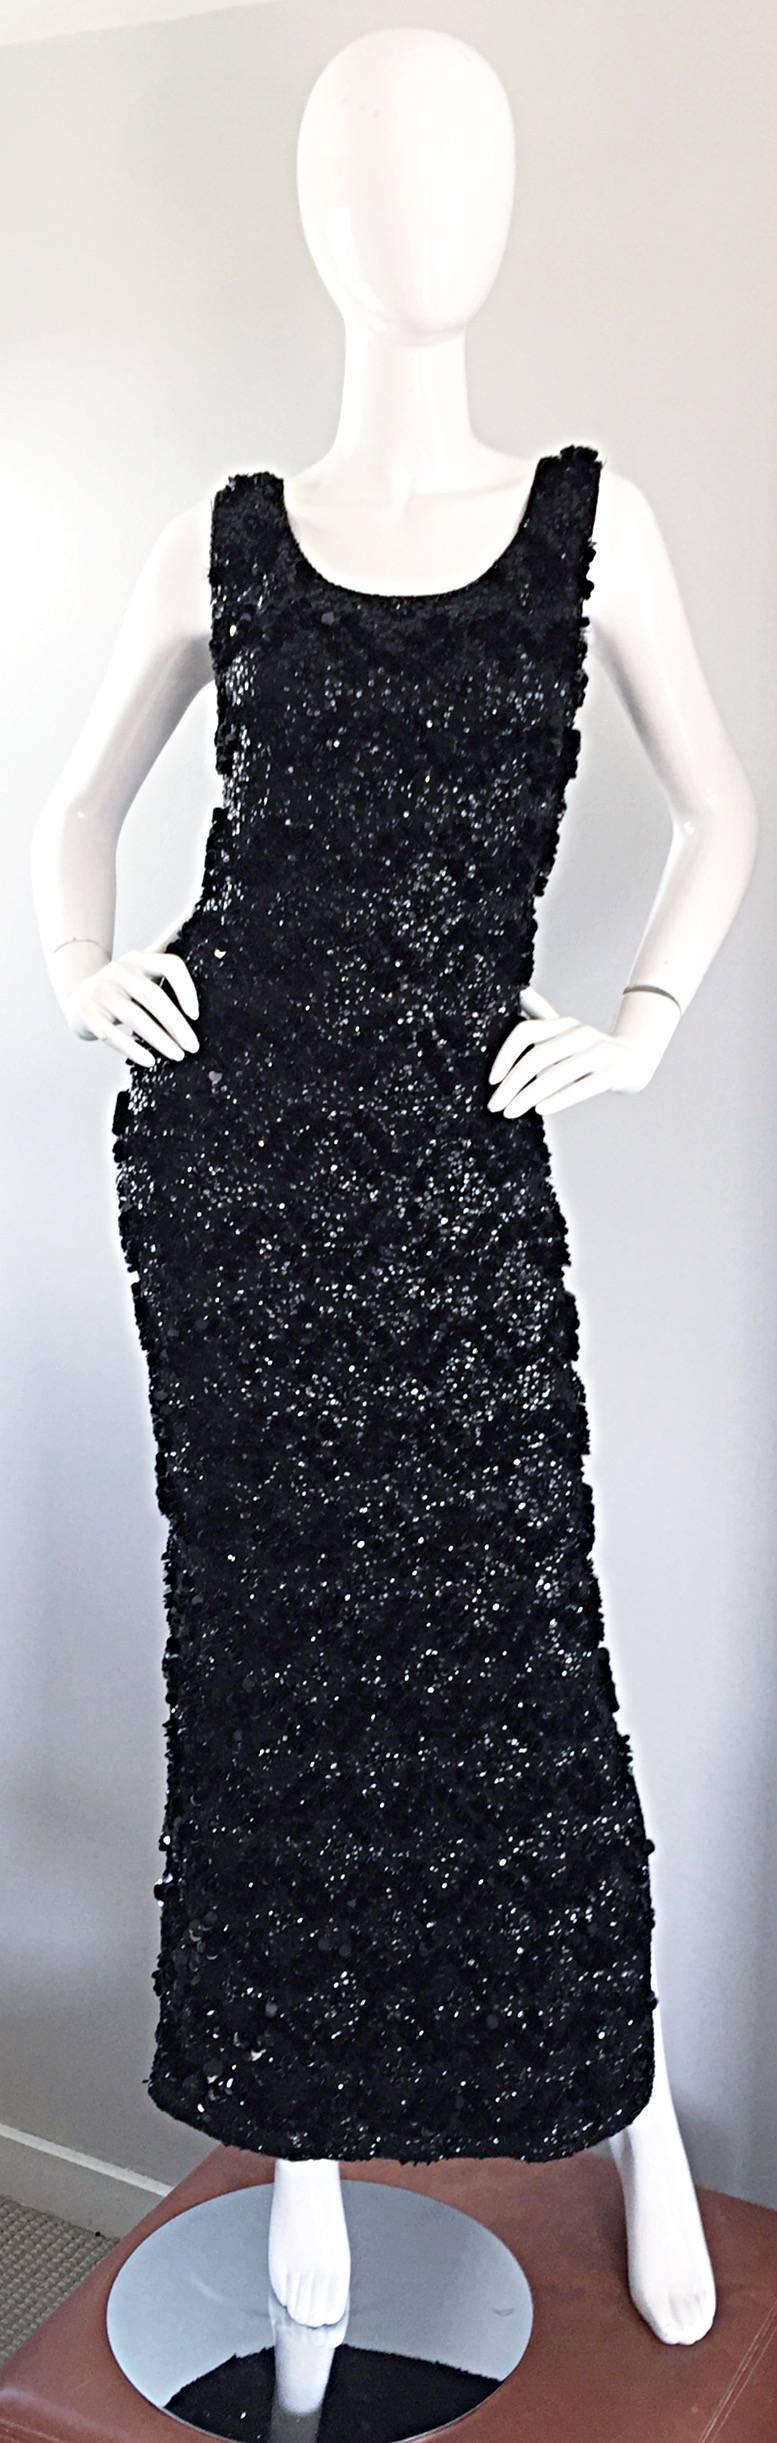 Breathtaking 1950s black wool knit couture fully sequined and paillete full length evening wiggle dress! This gem was made in Hong Kong, with the sought-after 